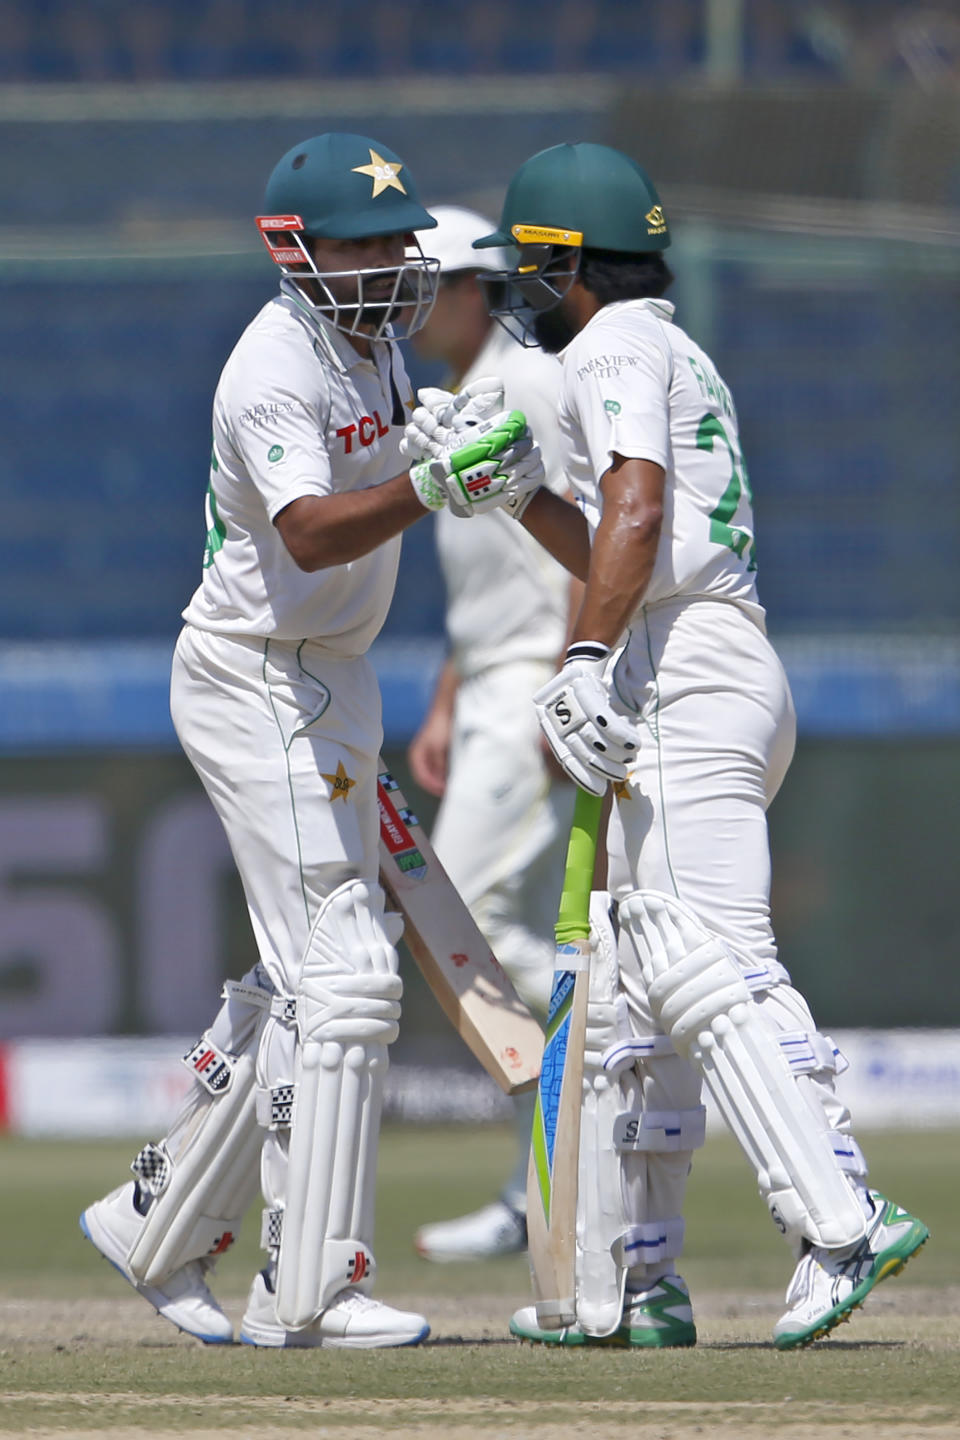 Pakistan's Babar Azam, left, is congratulated by Fawad Alam after completing 150 runs on the fifth day of the second test match between Pakistan and Australia at the National Stadium in Karachi Pakistan, Wednesday, March 16, 2022. (AP Photo/Anjum Naveed)